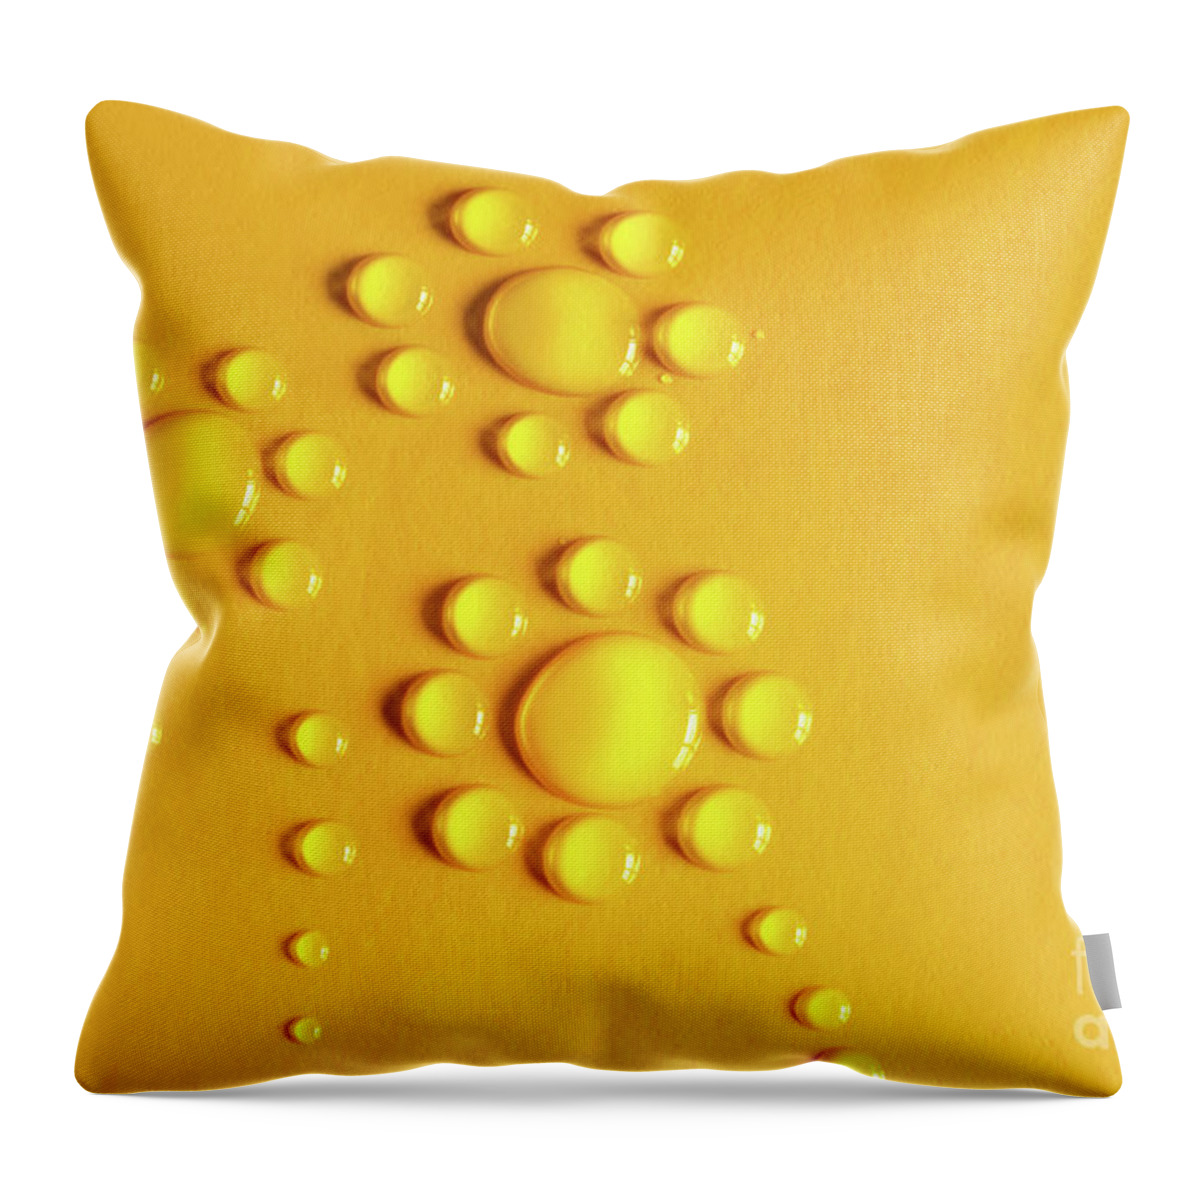 Abstract Throw Pillow featuring the photograph Water Flowers by Carlos Caetano